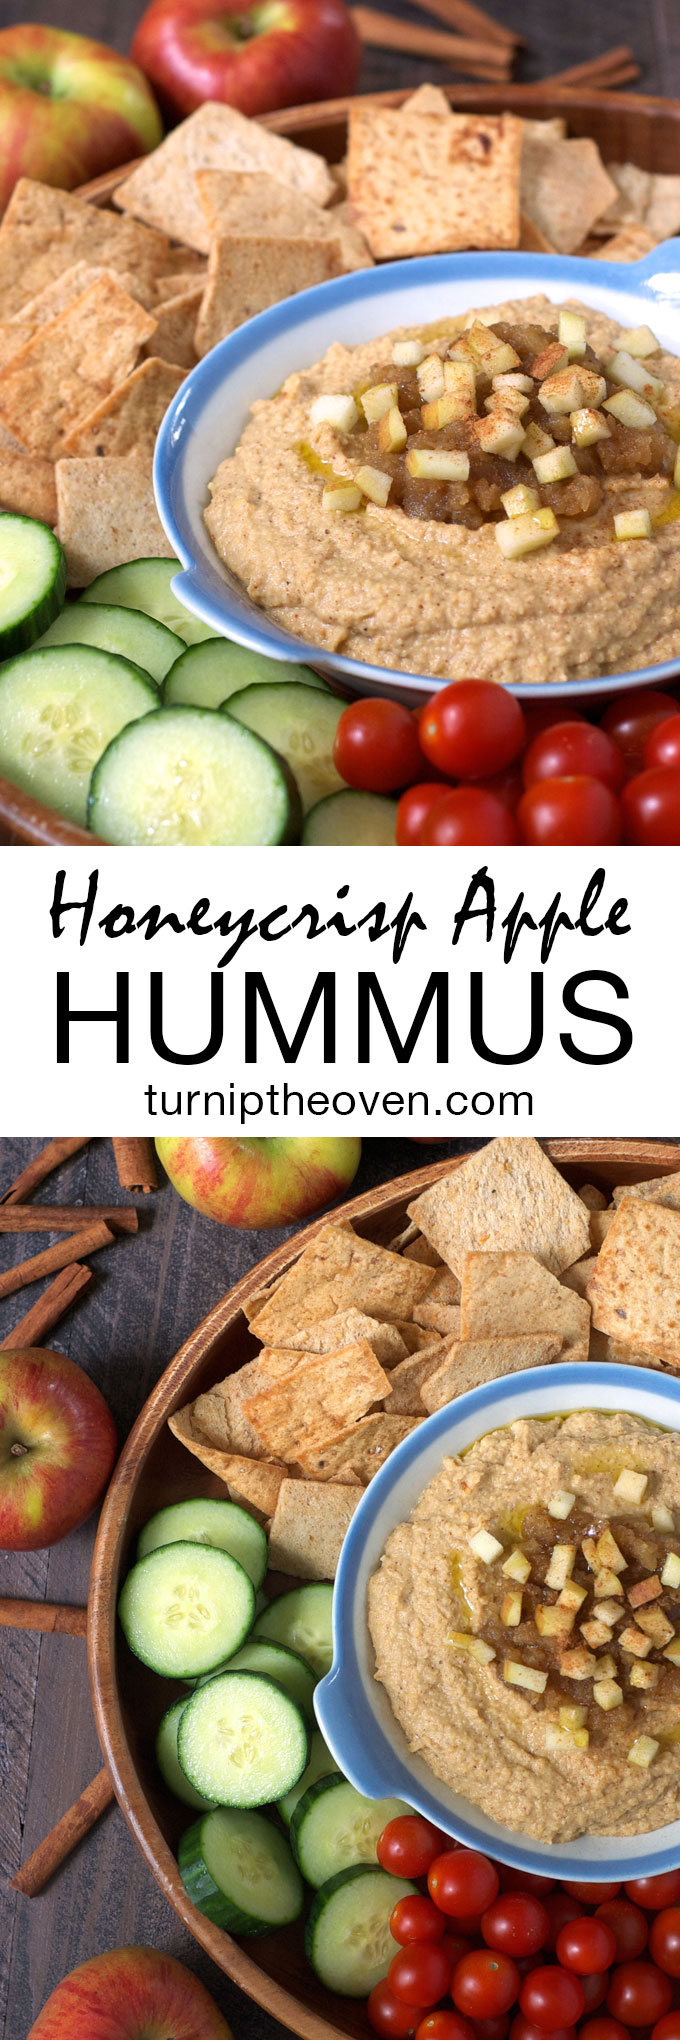 This honeycrisp apple hummus is the perfect kid-friendly, quick and healthy dip. Apples, cinnamon, and almond butter are blended into traditional hummus for a fantastic new flavor that's also vegan and gluten-free!